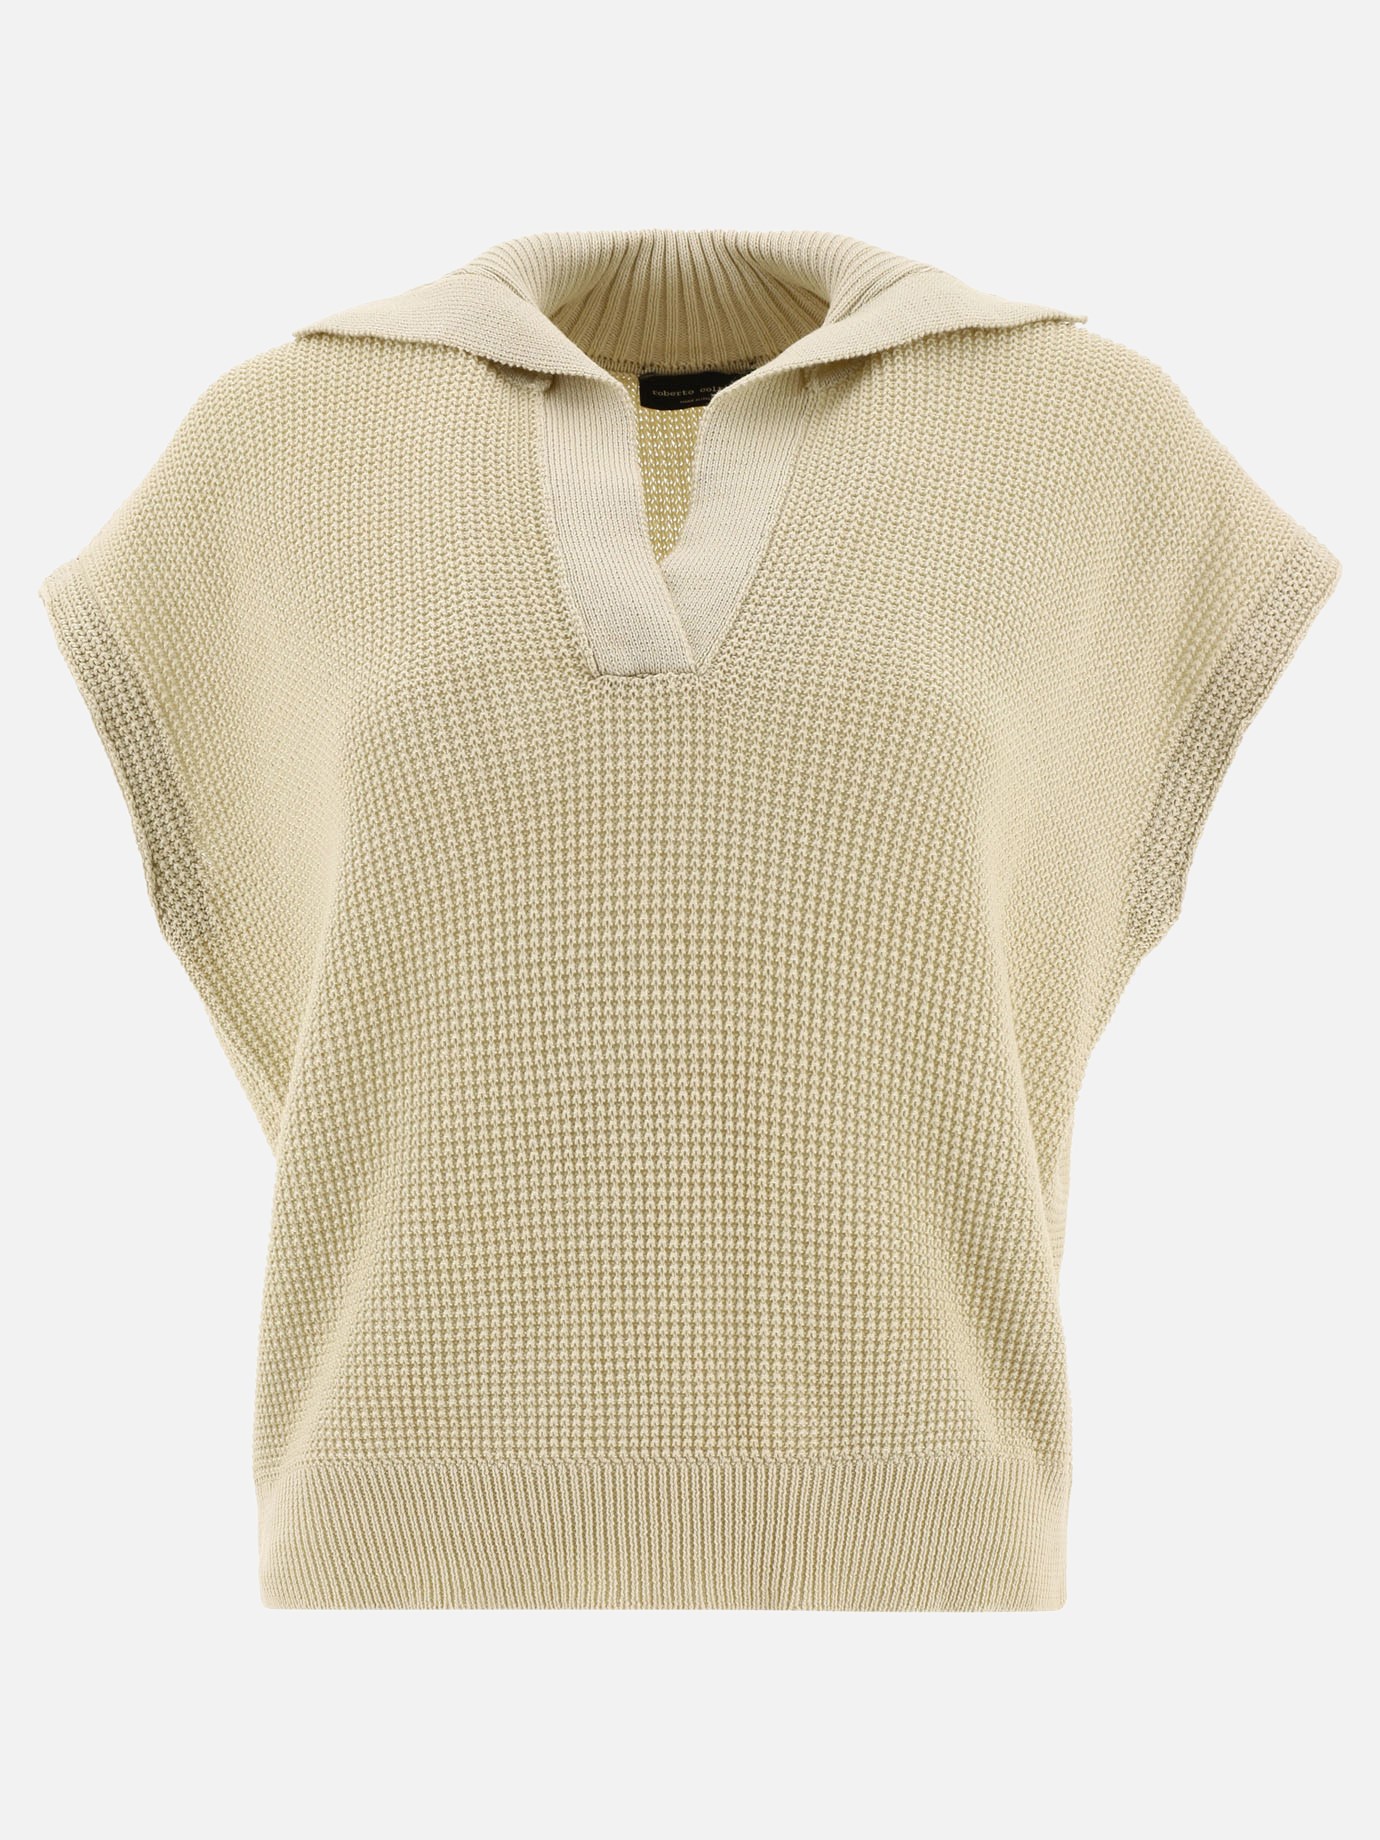 Sleeveless sweater with collar by Roberto Collina